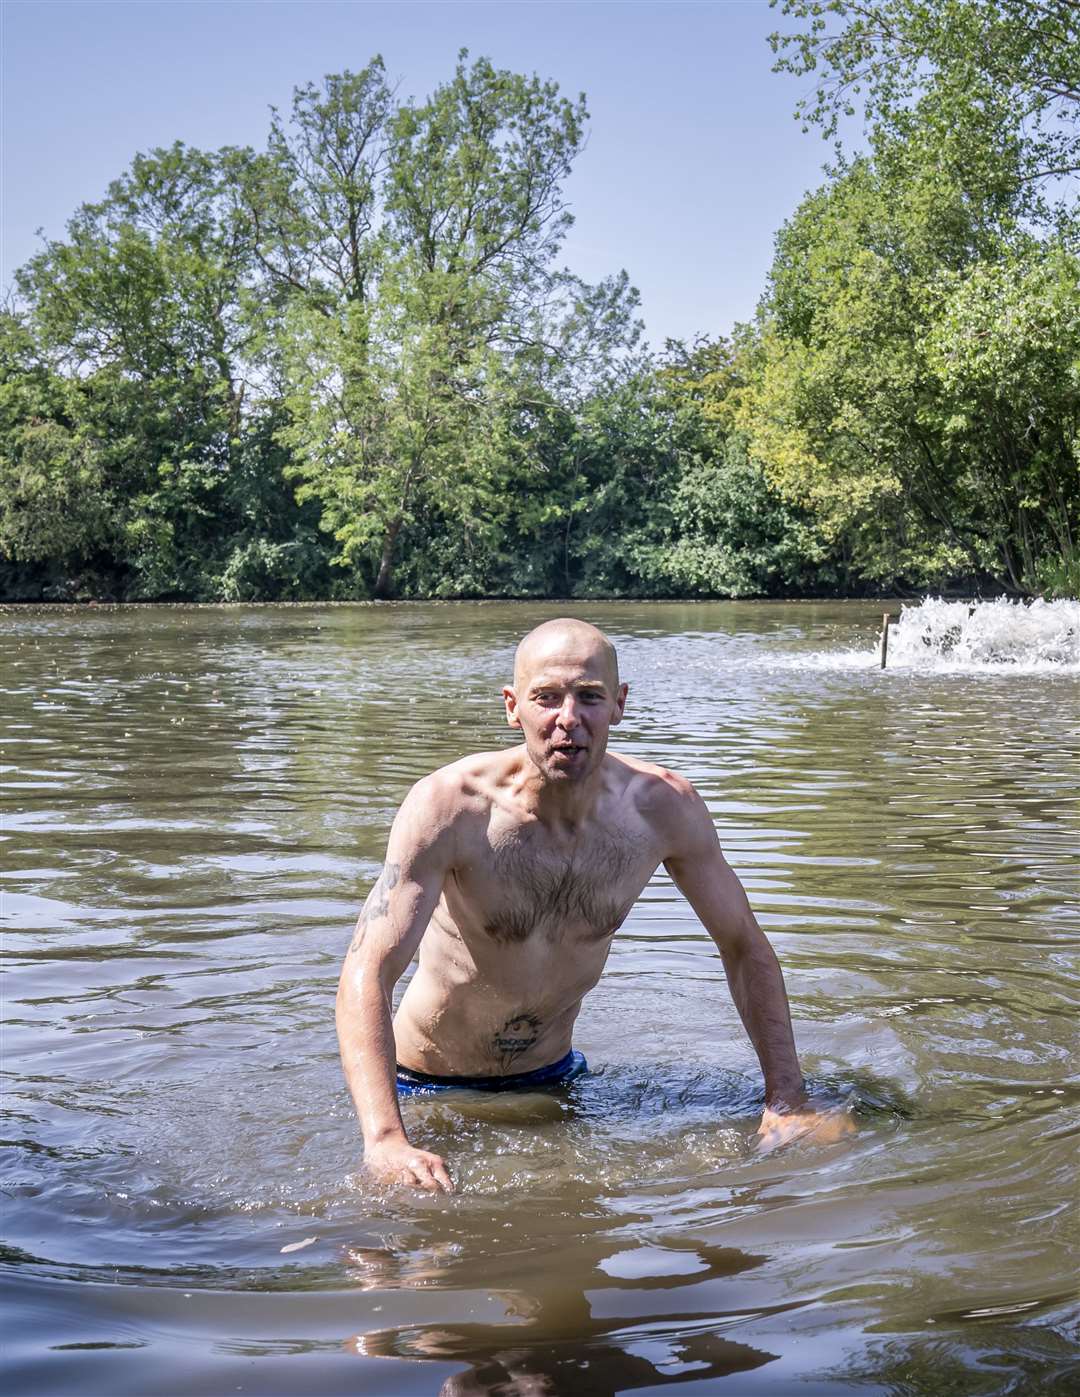 A man swims in a lake in Sandall Park, Doncaster (Danny Lawson/PA)